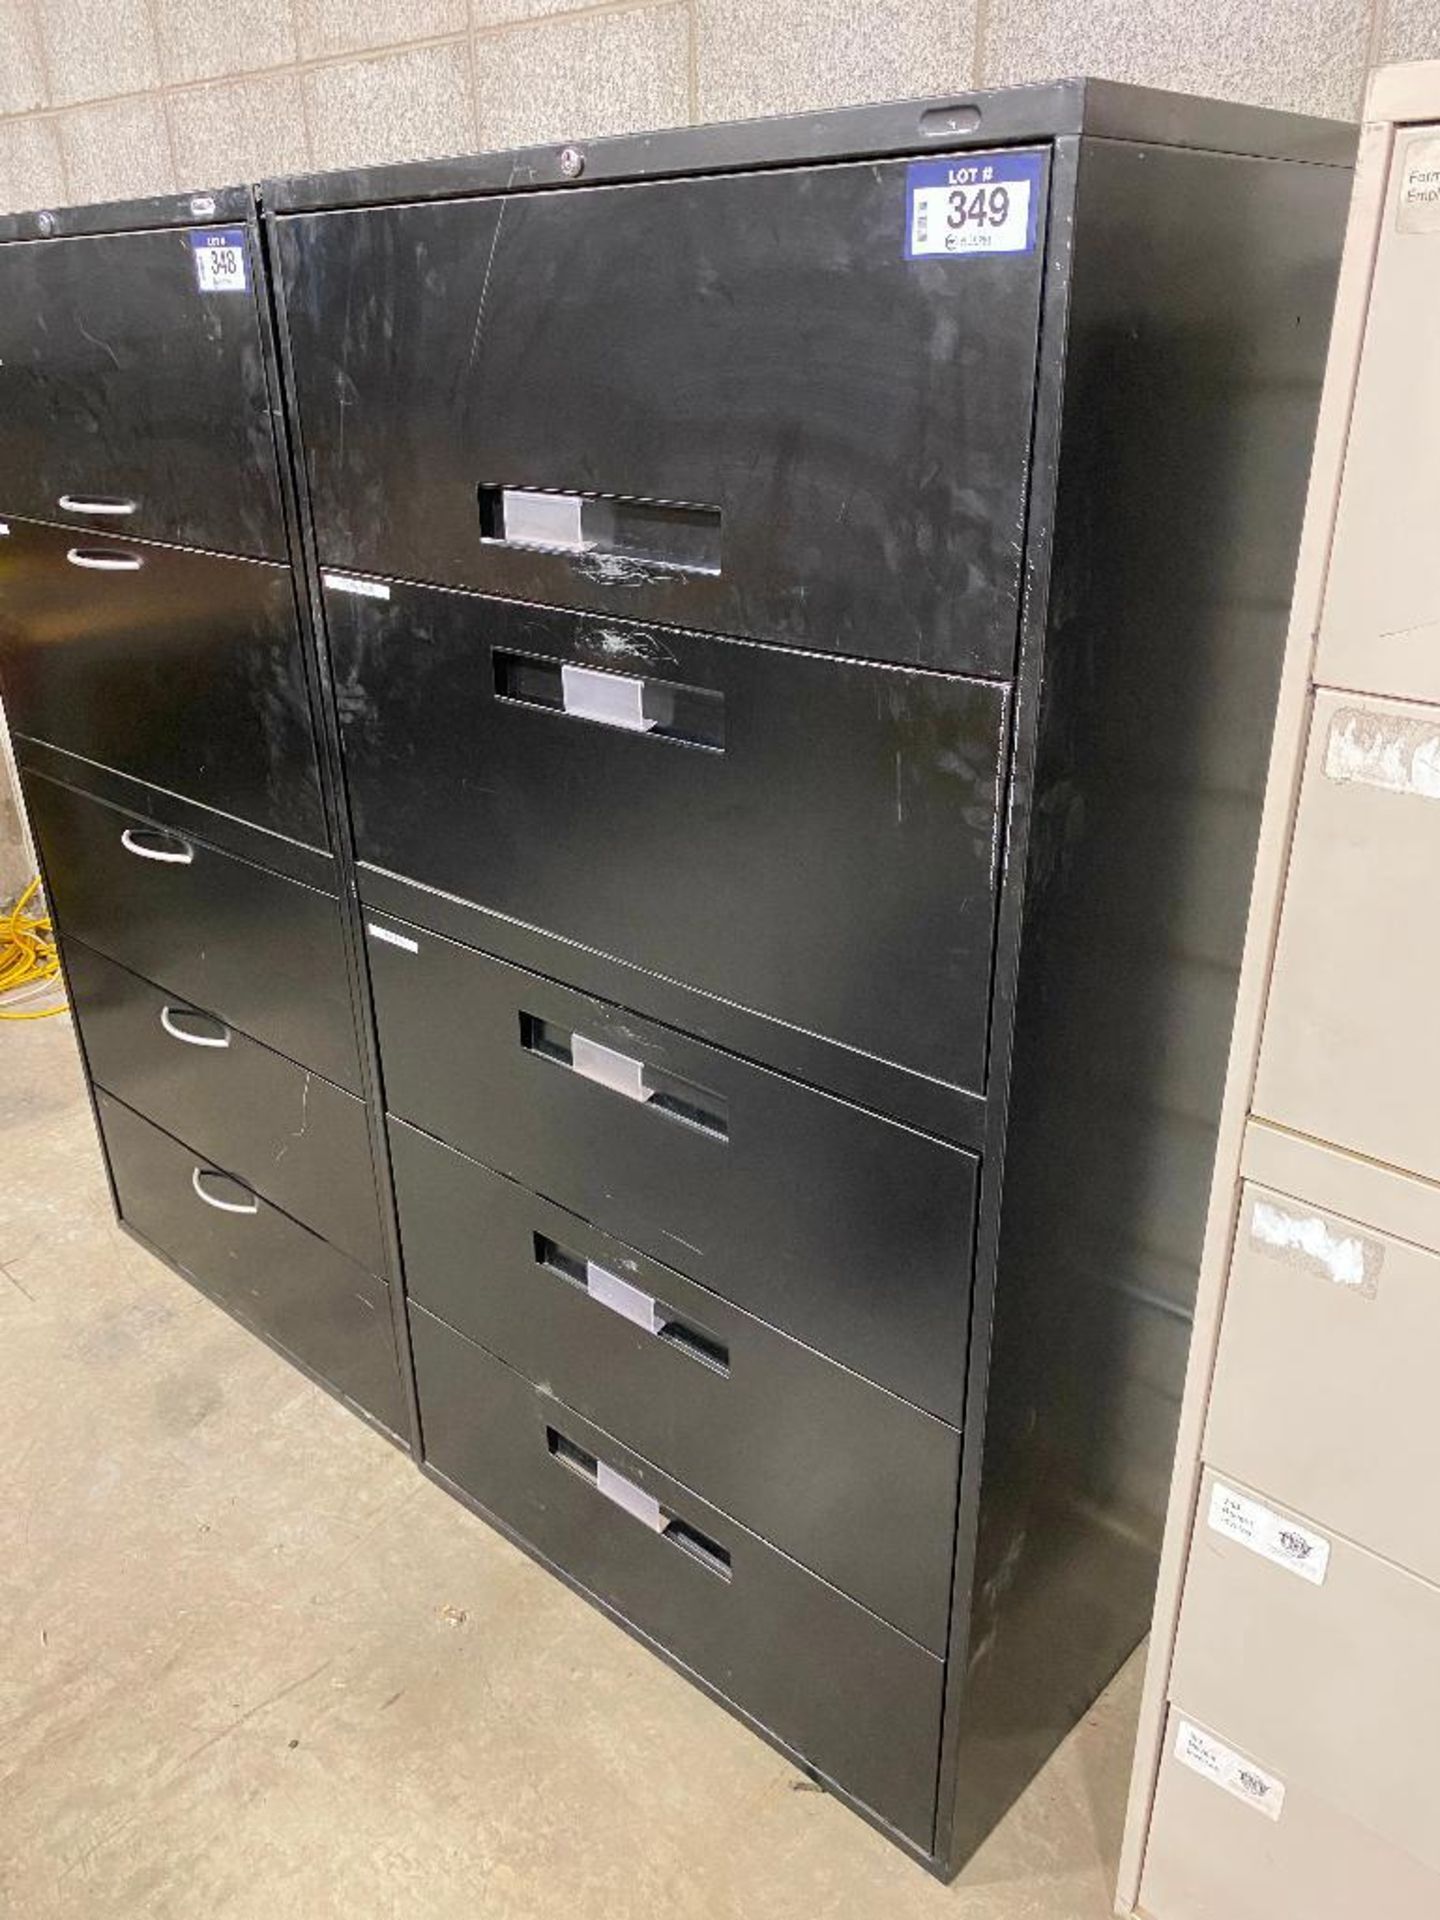 5-Drawer Lateral Filing Cabinet - Image 2 of 2